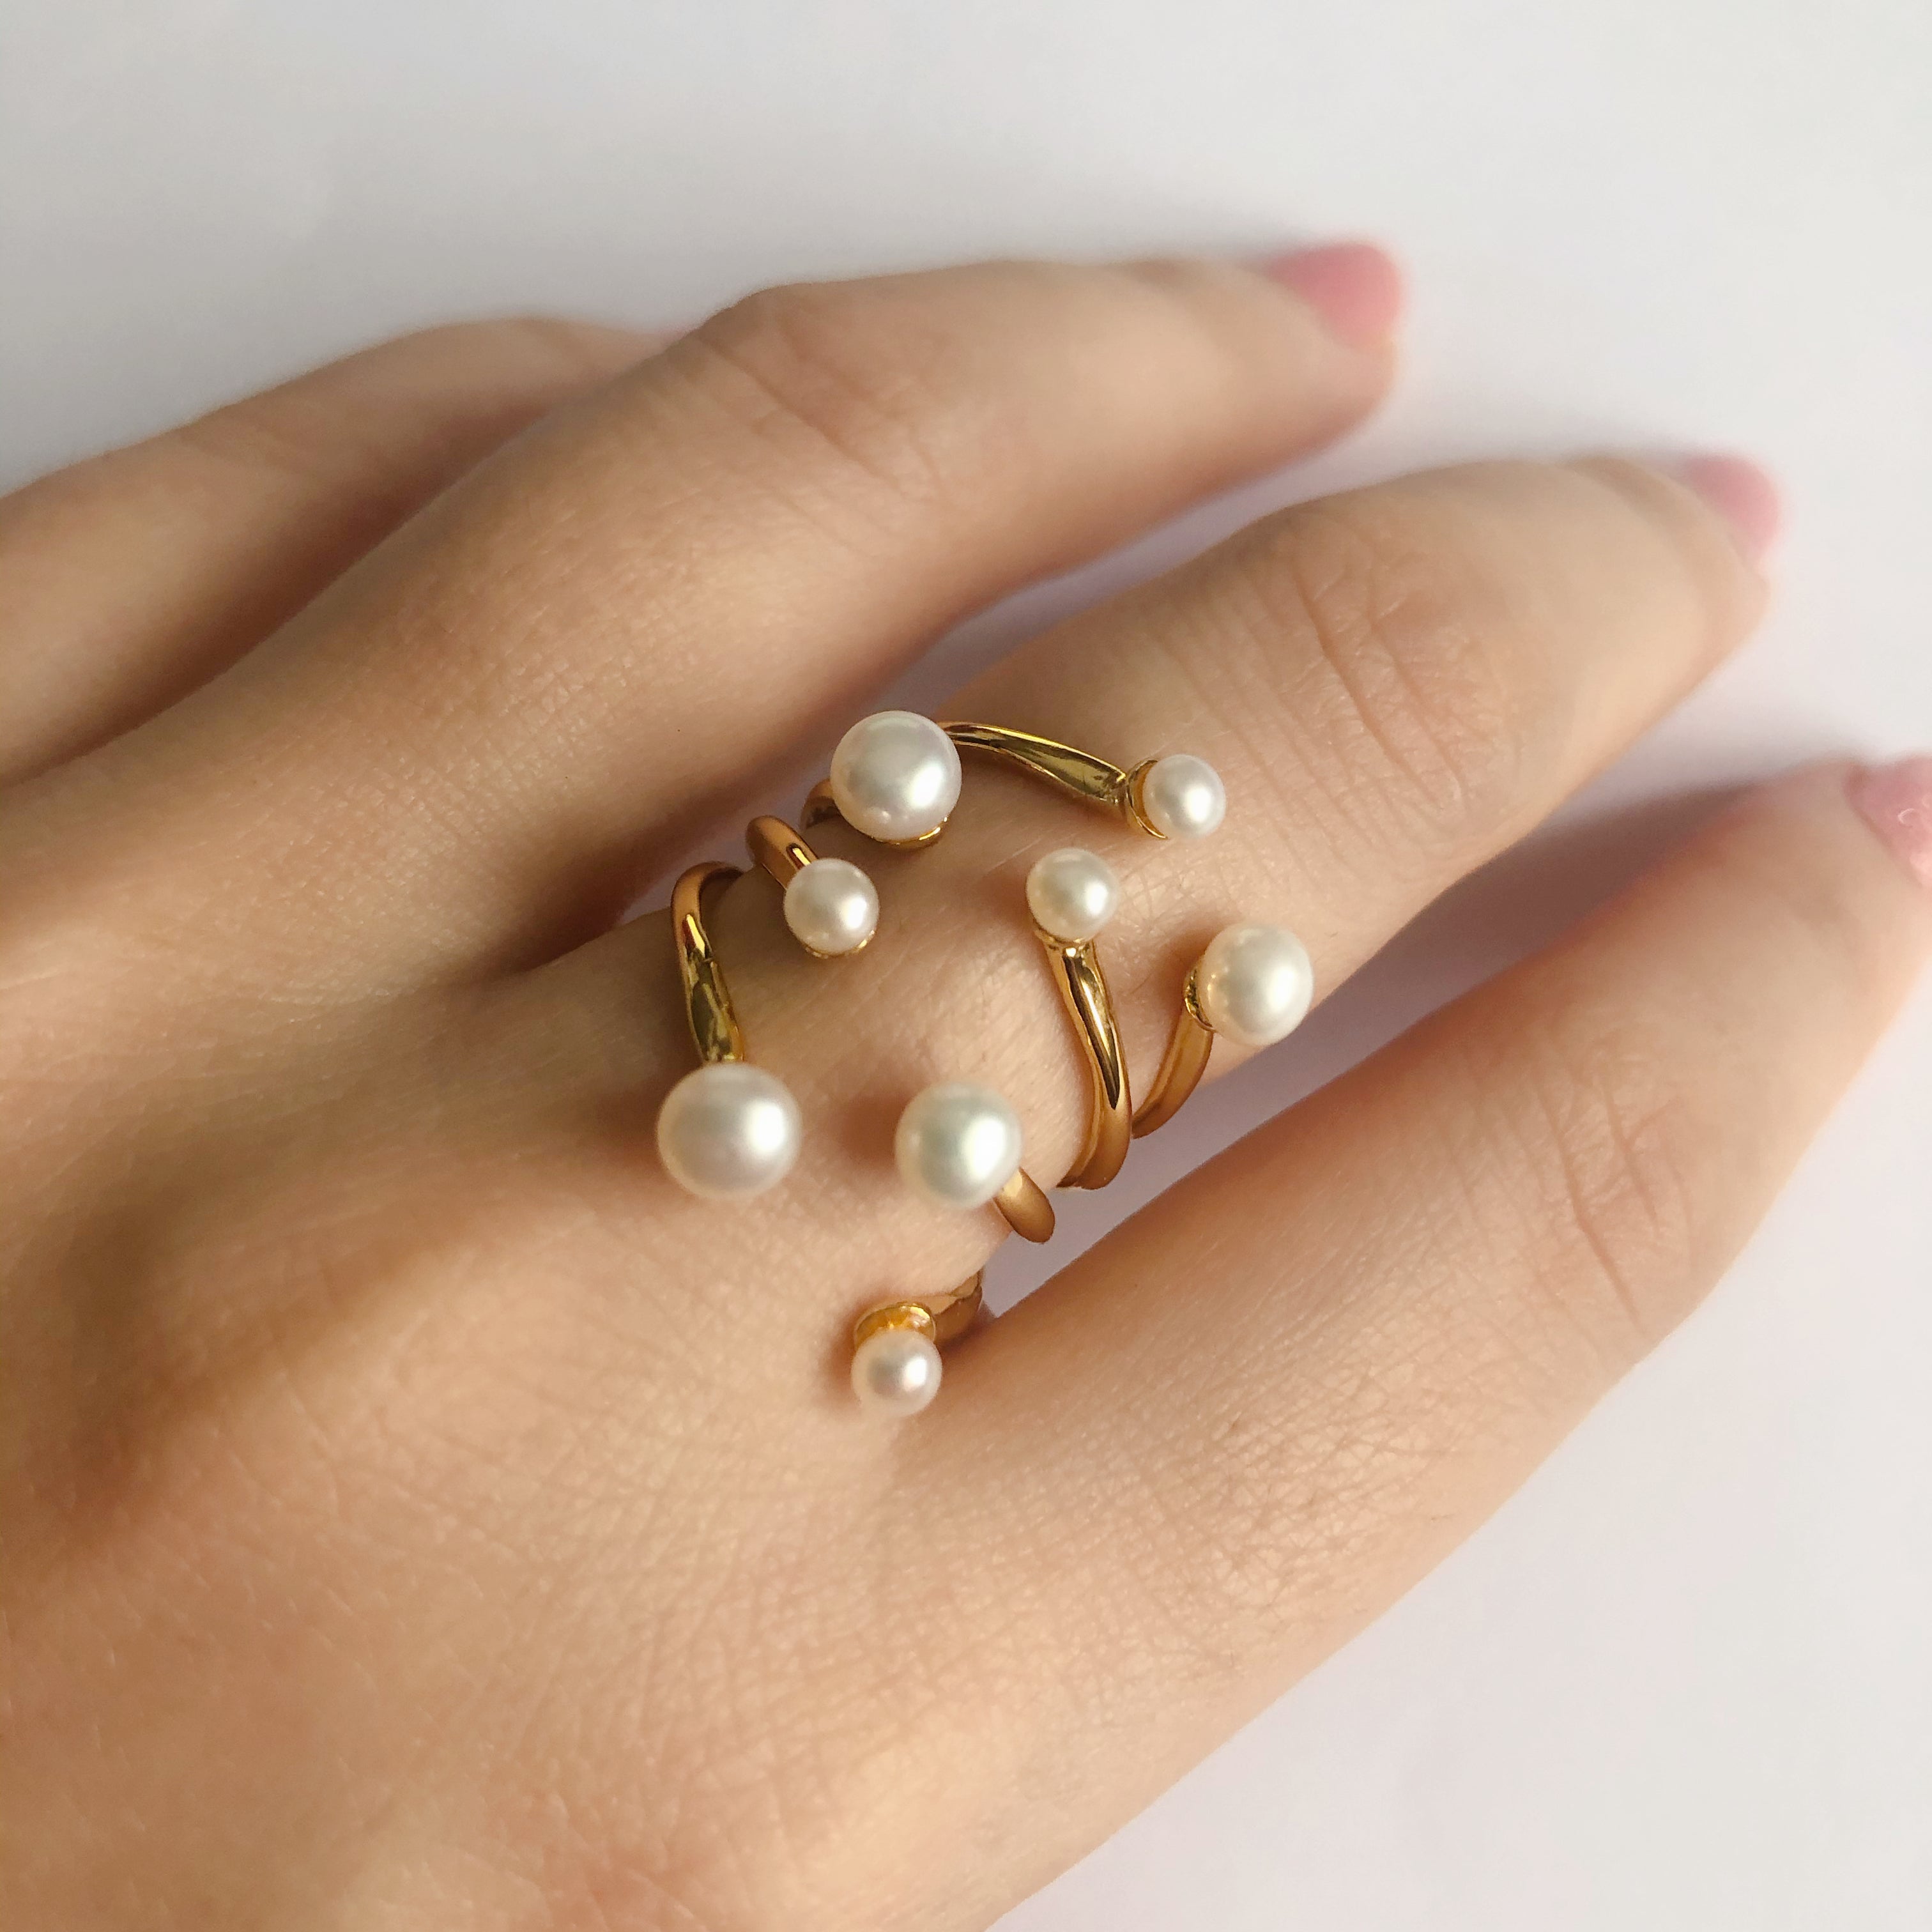 All About Them Pearls: Look 1